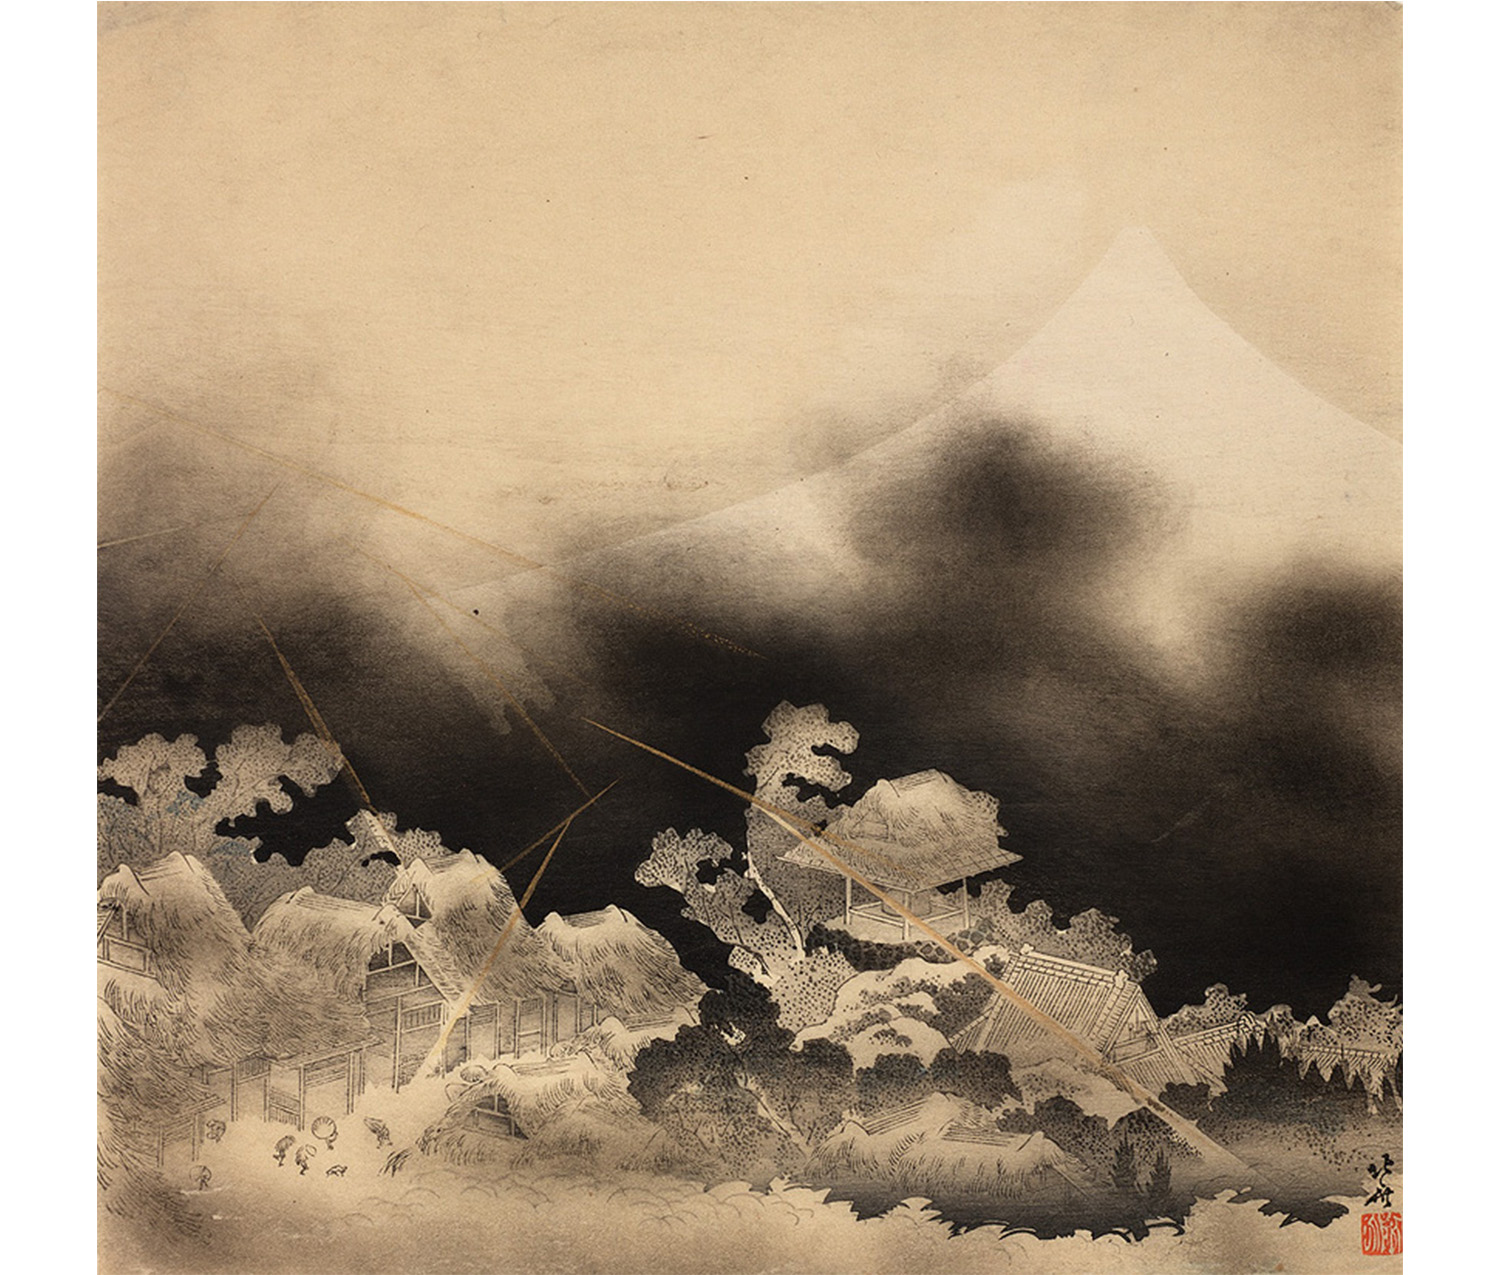 dark stormy scene with lightning, figures at lower left running for shelter of buildings, white Mount Fuji in background